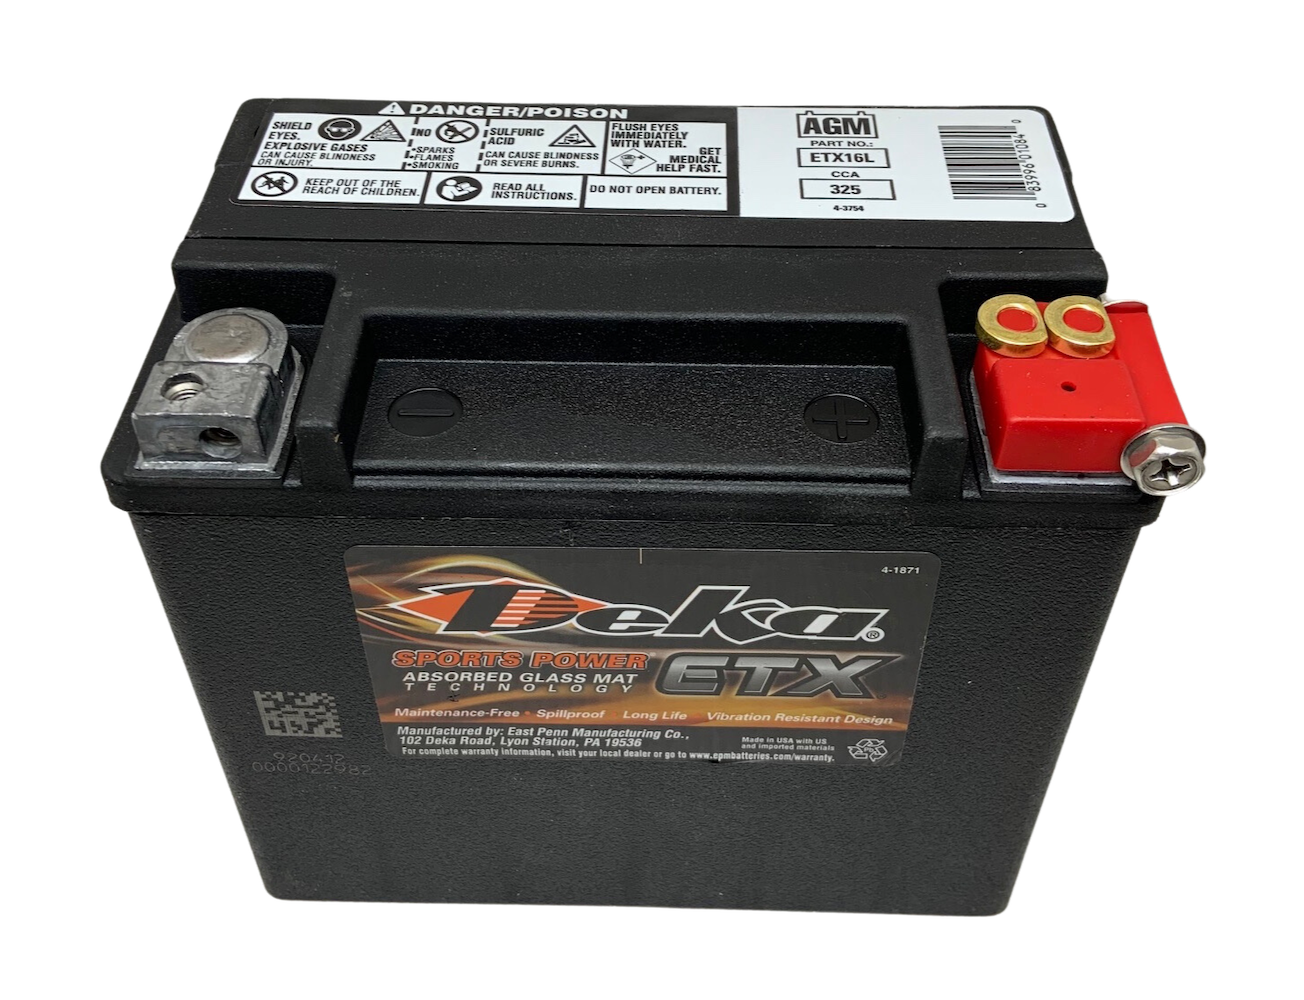 what is the correct battery for a 2013 keystone ultra light travel trailer